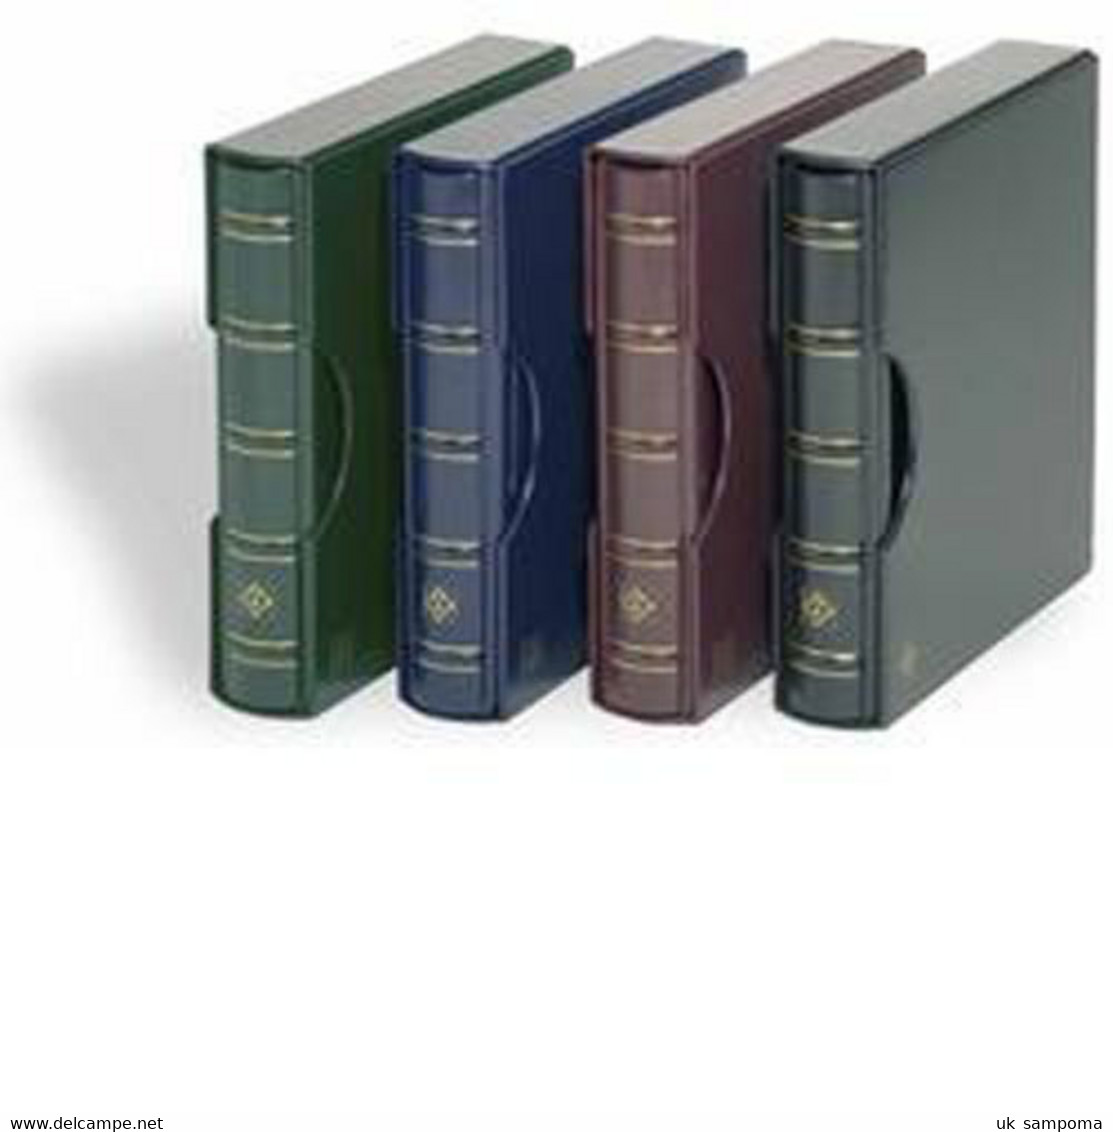 Turn-bar Binder PERFECT DP, In Classic Design With Slipcase, Blue - Grand Format, Fond Noir